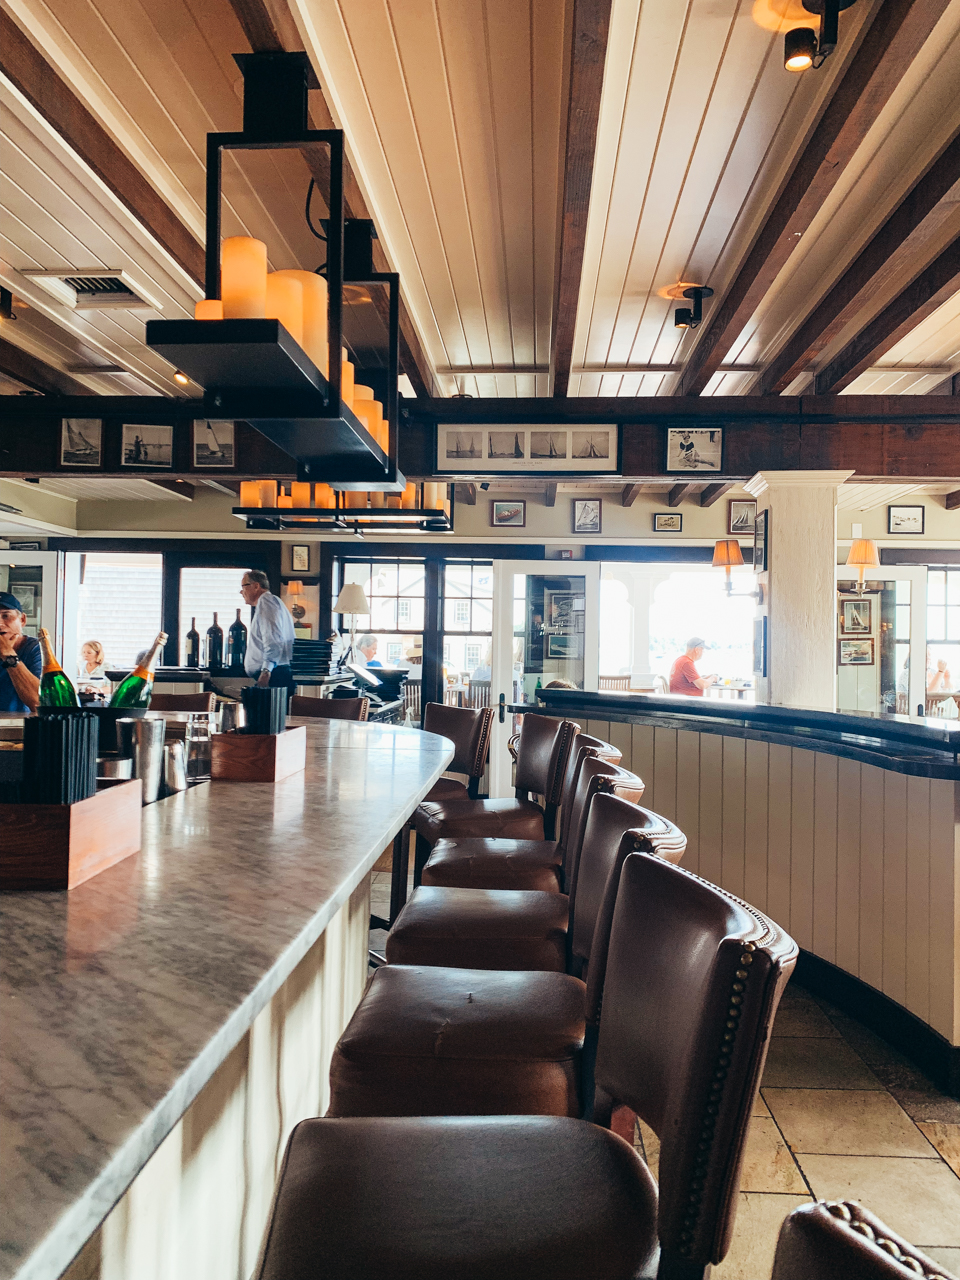 Atlantic Fish and Chop House | New England Foodie Guide: Top 8 Restaurants in Martha's Vineyard You Must Try by popular New England Food Blogger, Shannon Shipman: image of Atlantic Fish and Chop House in Martha's Vineyard.